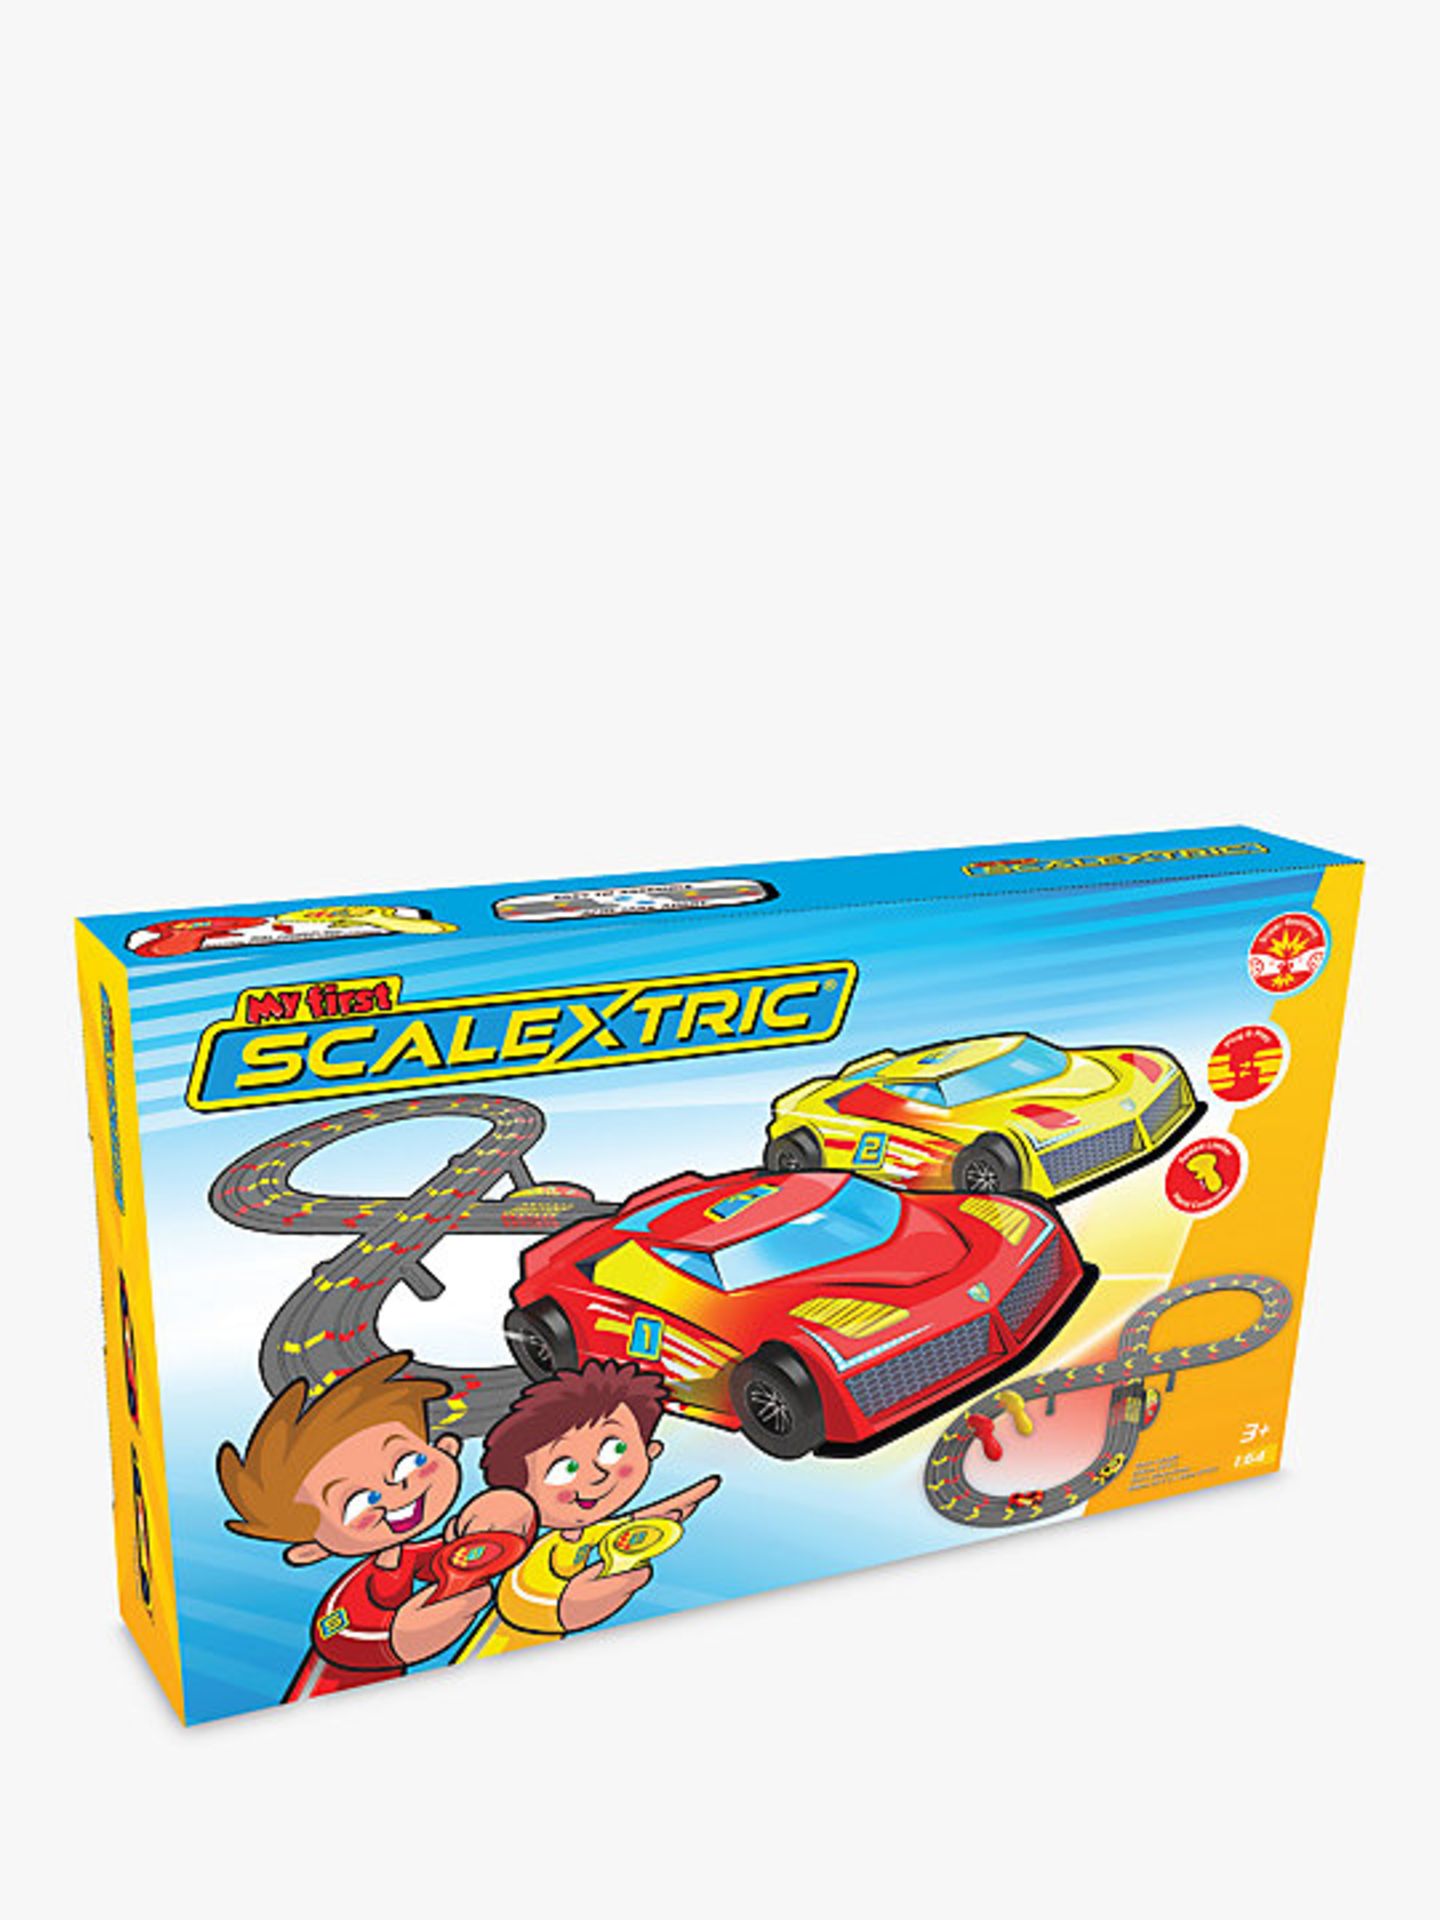 Pallet of Raw Customer Returns - Category - STANDARD TOYS - P100038396 - Image 23 of 34